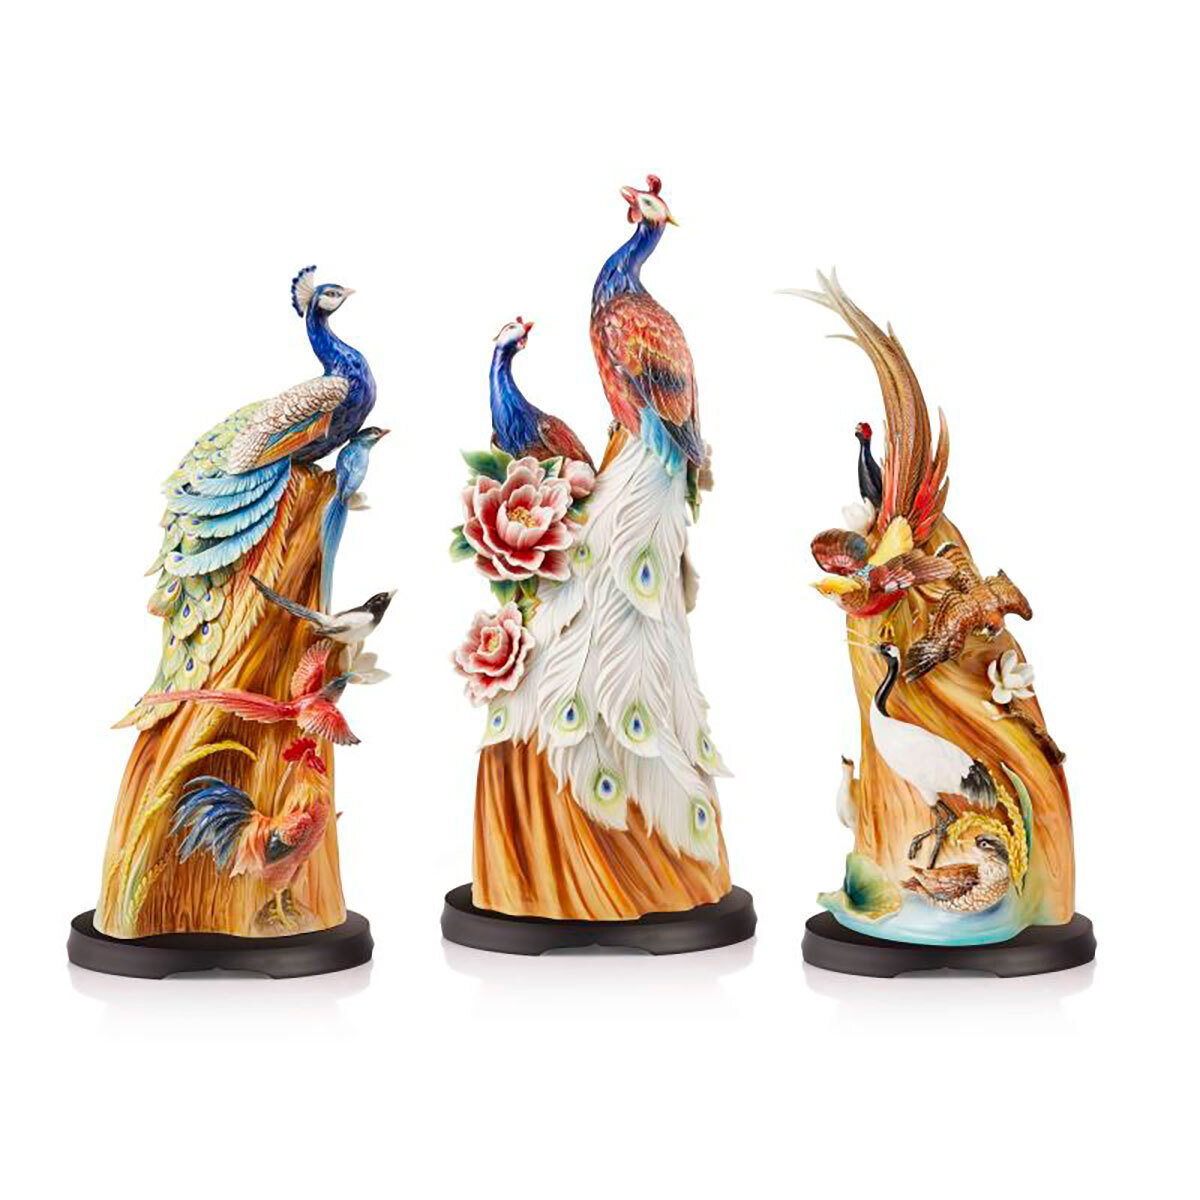 Franz Porcelain A Hundred Of Birds Paying Homage To The Phoenix Design Sculptured Porcelain Figurines With Wooden Base Set of 3 FZ03771